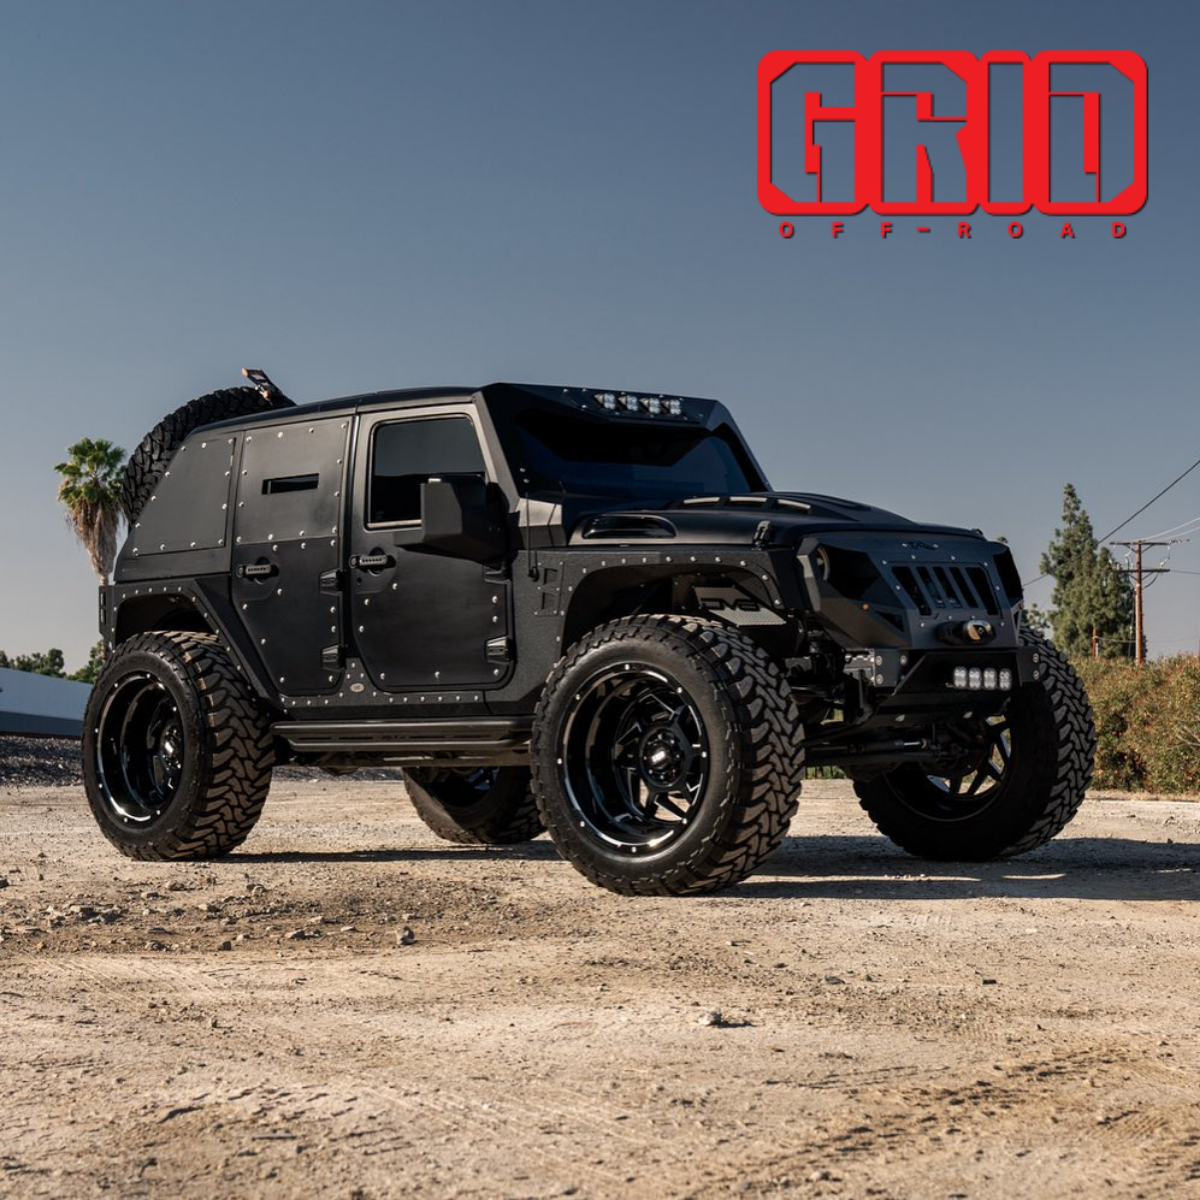 GRID Off-Road wheels meet your off-road needs with style.